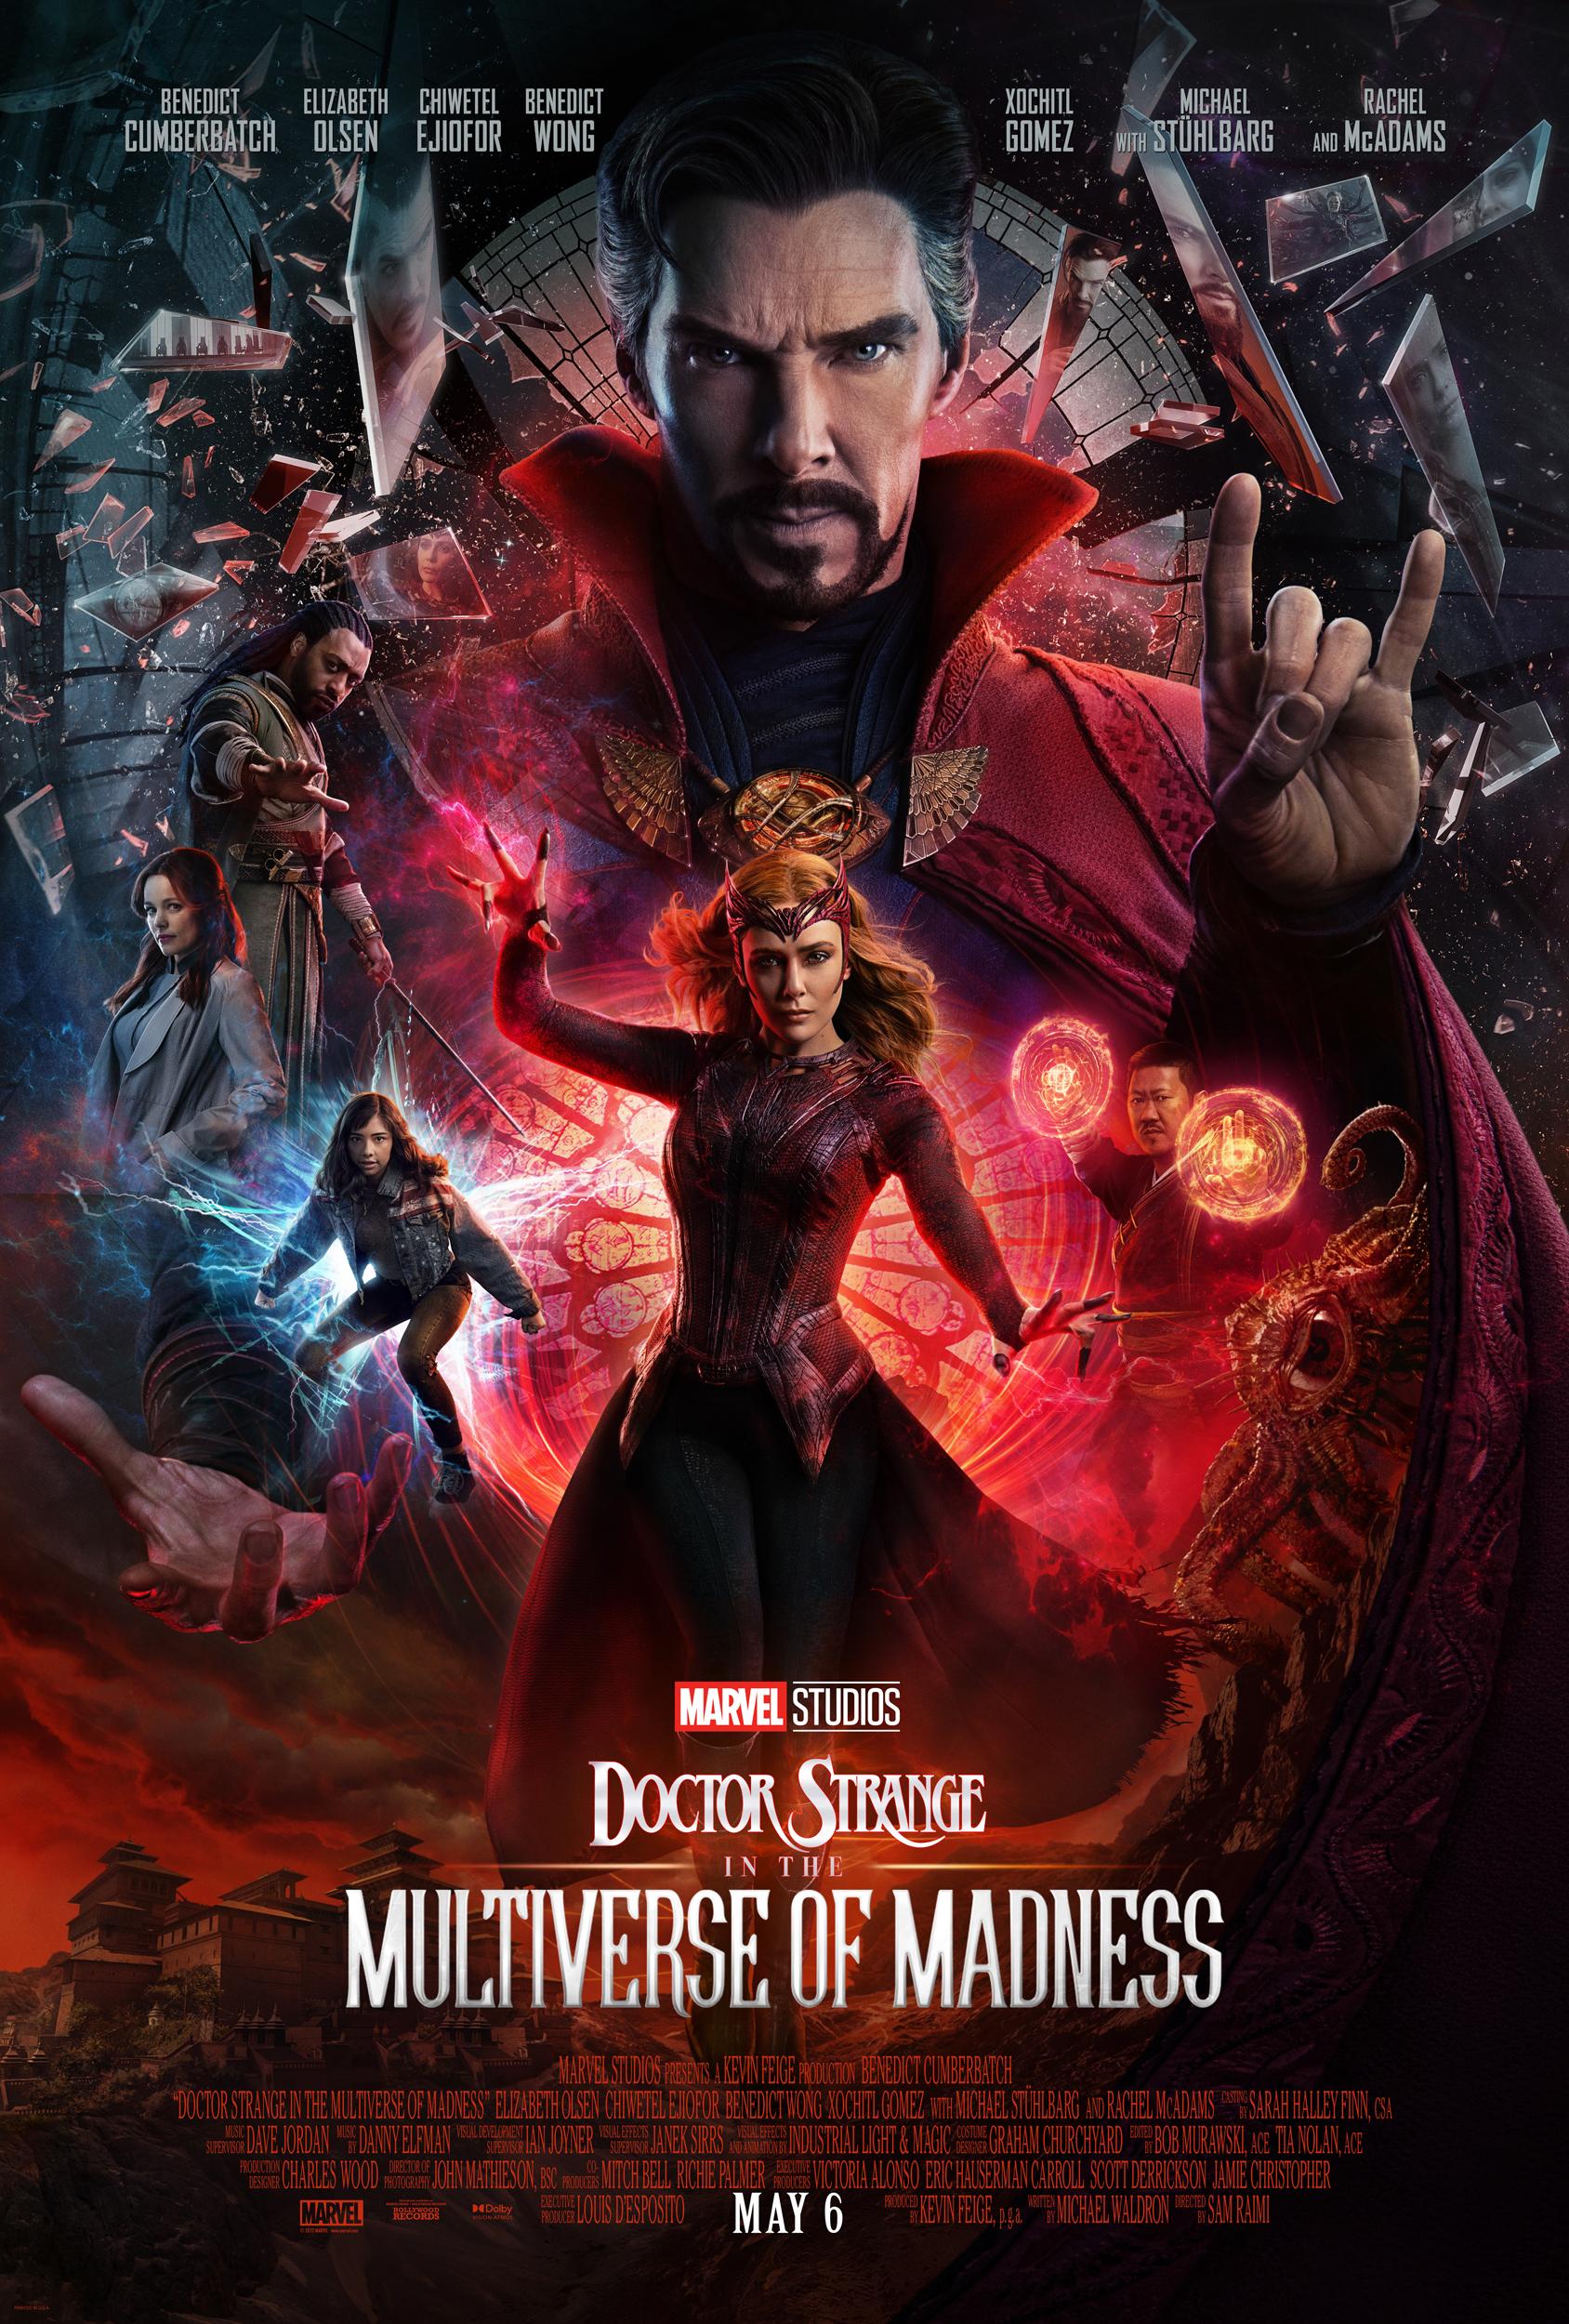 Doctor Strange in the Multiverse of Madness (May 6, 2022): This film delves deep into the multiverse as Doctor Strange teams up with Scarlet Witch.